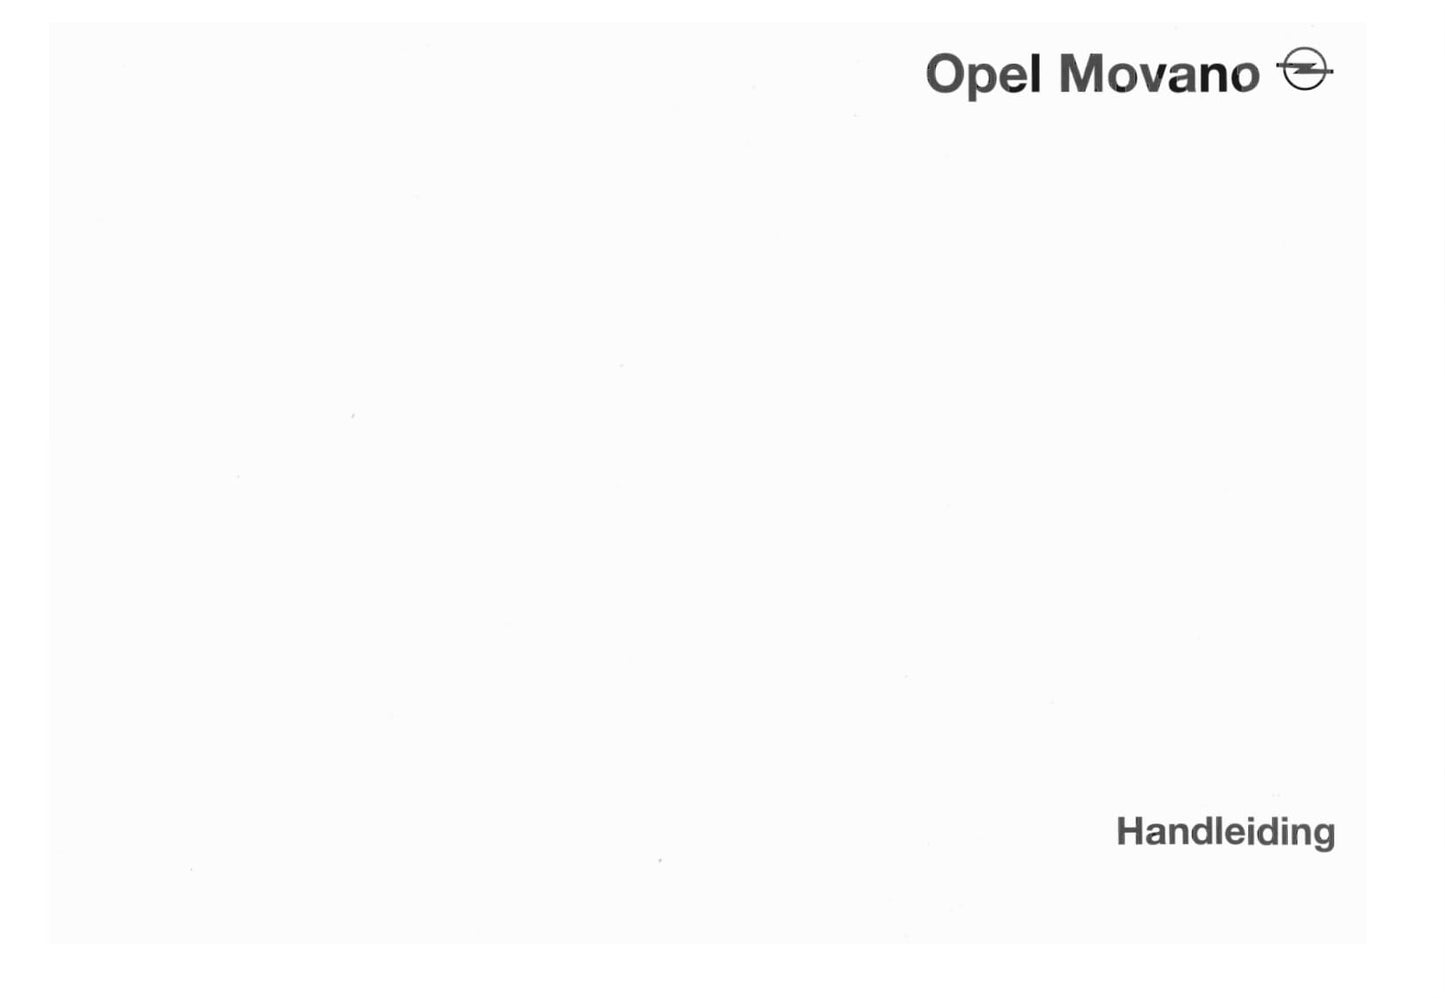 1998-2003 Opel Movano Owner's Manual | Dutch